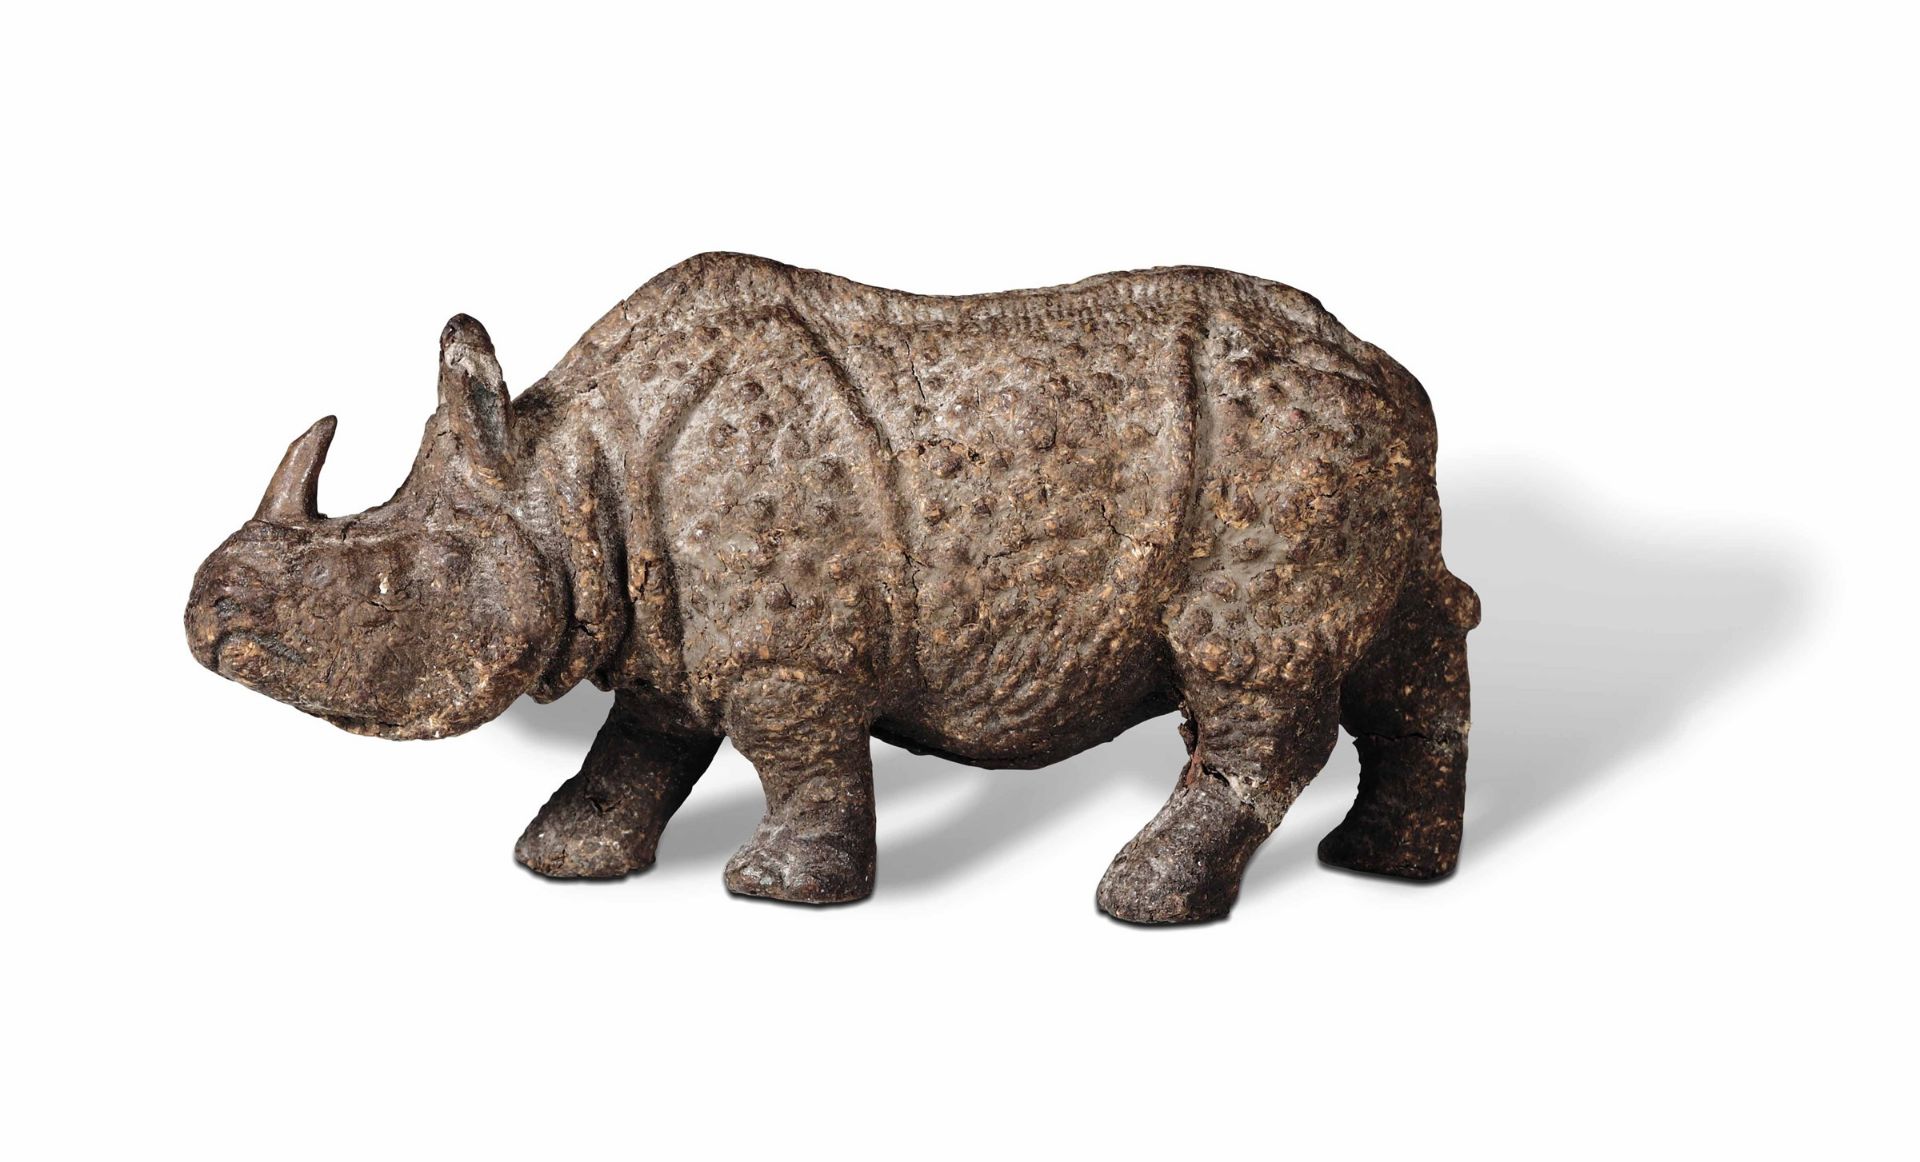 A rhinoceros, 18th-19th century - A curious sculpture, realistically moulded in [...]